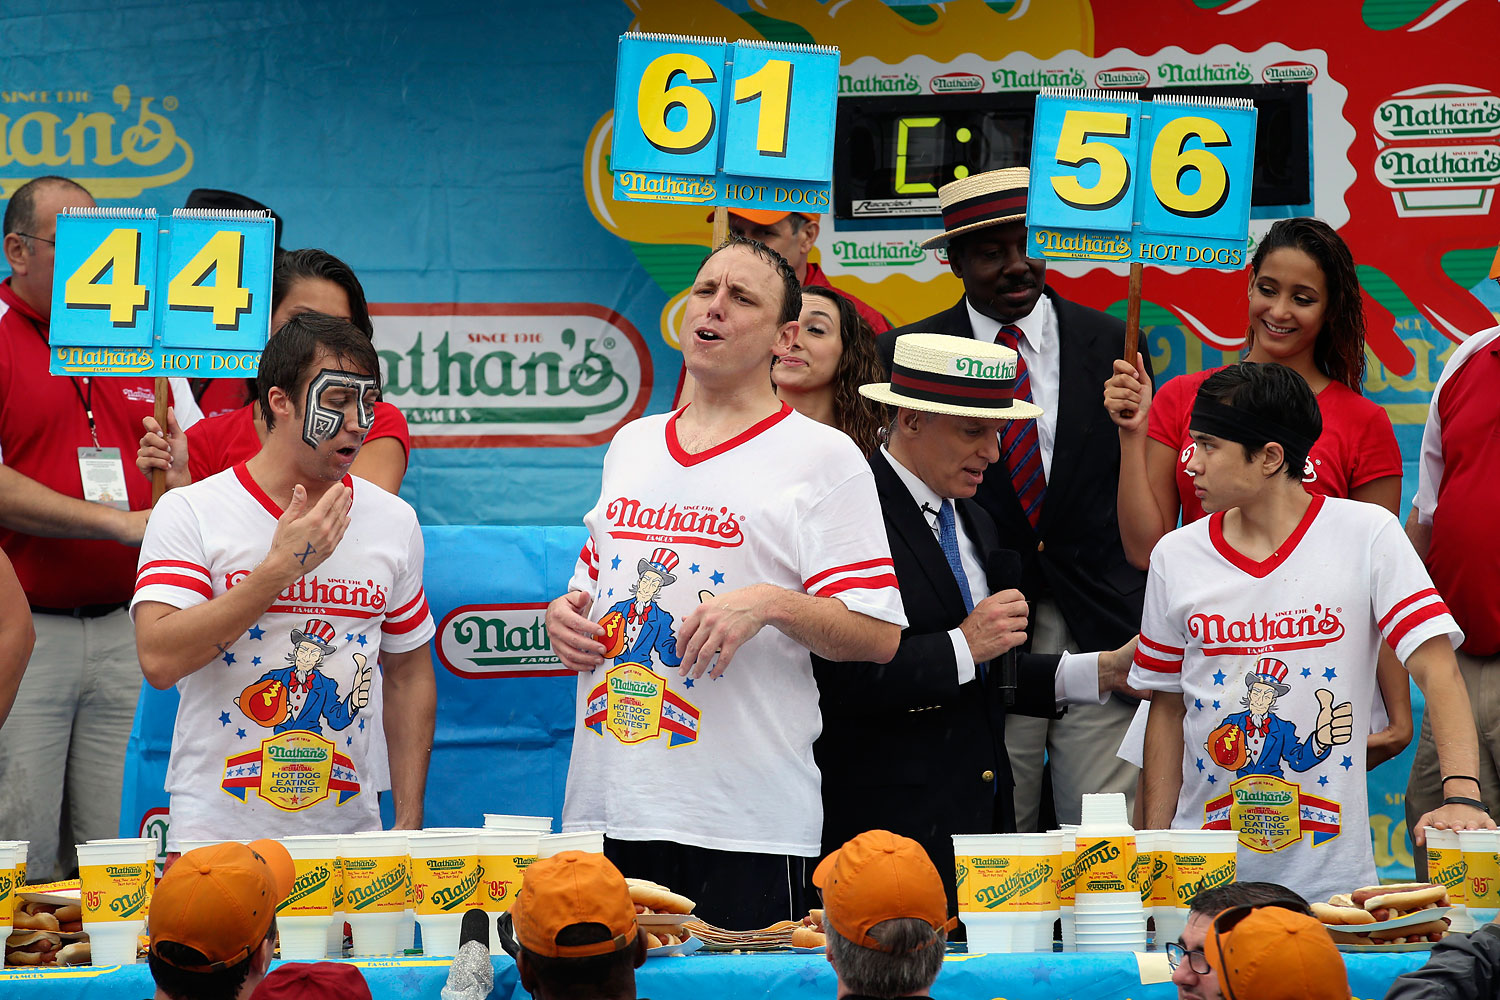 Joey Chestnut, center, reacts alongside Tim Janus, left, and Matt Stonie, right, after consuming a total of 61 hot dogs in ten minutes.